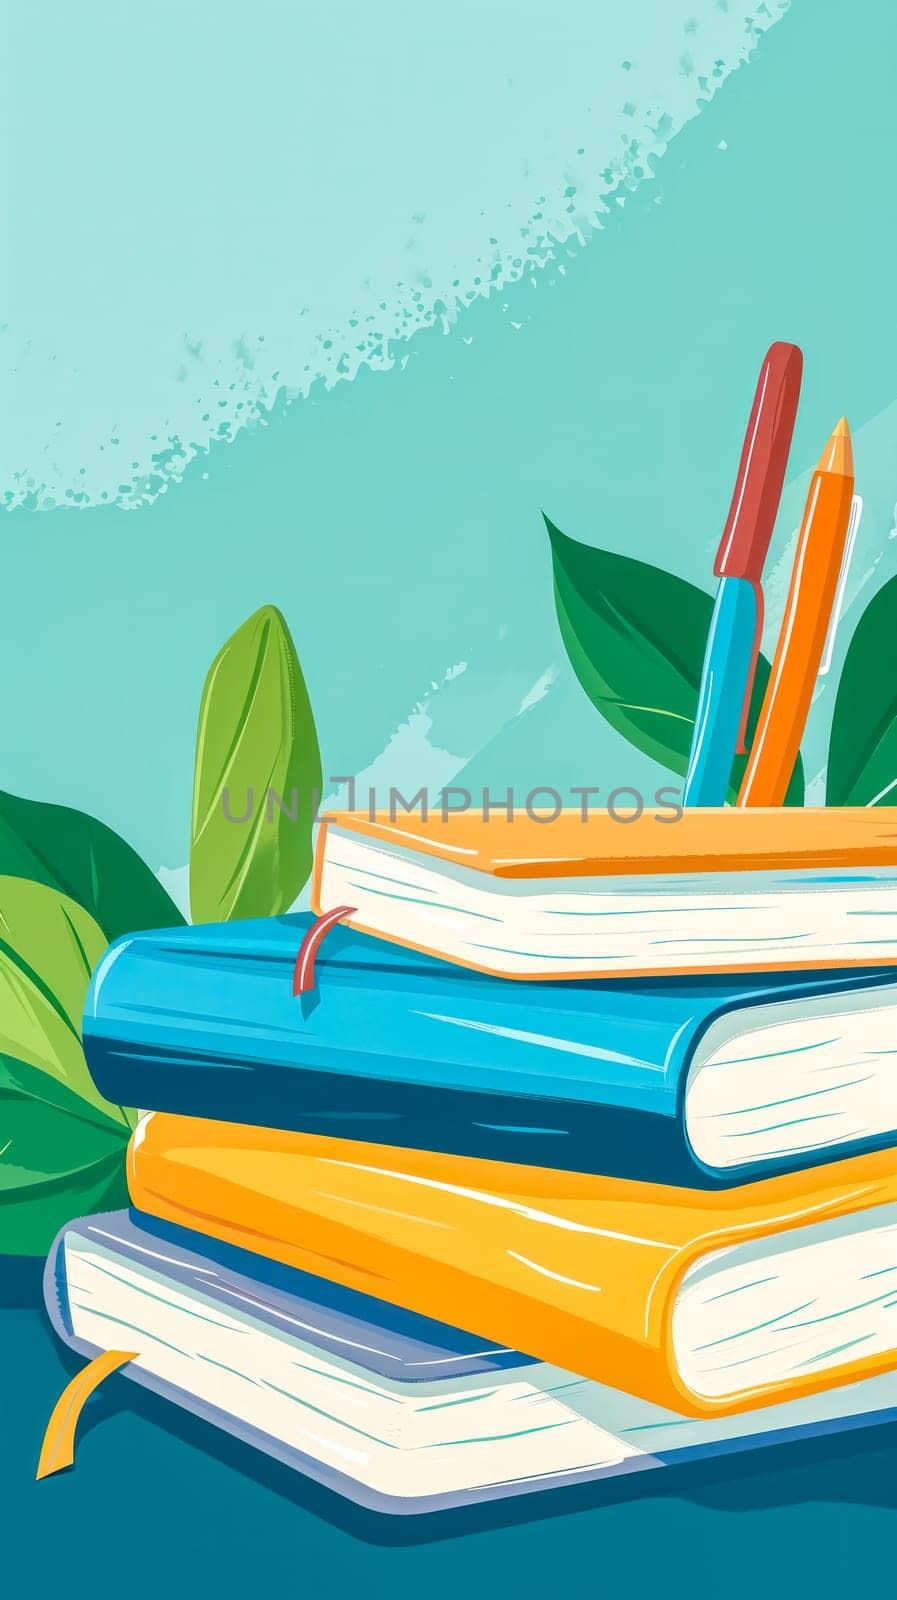 Illustration of stacked books with a pen and pencil, symbolizing education and learning. vertical